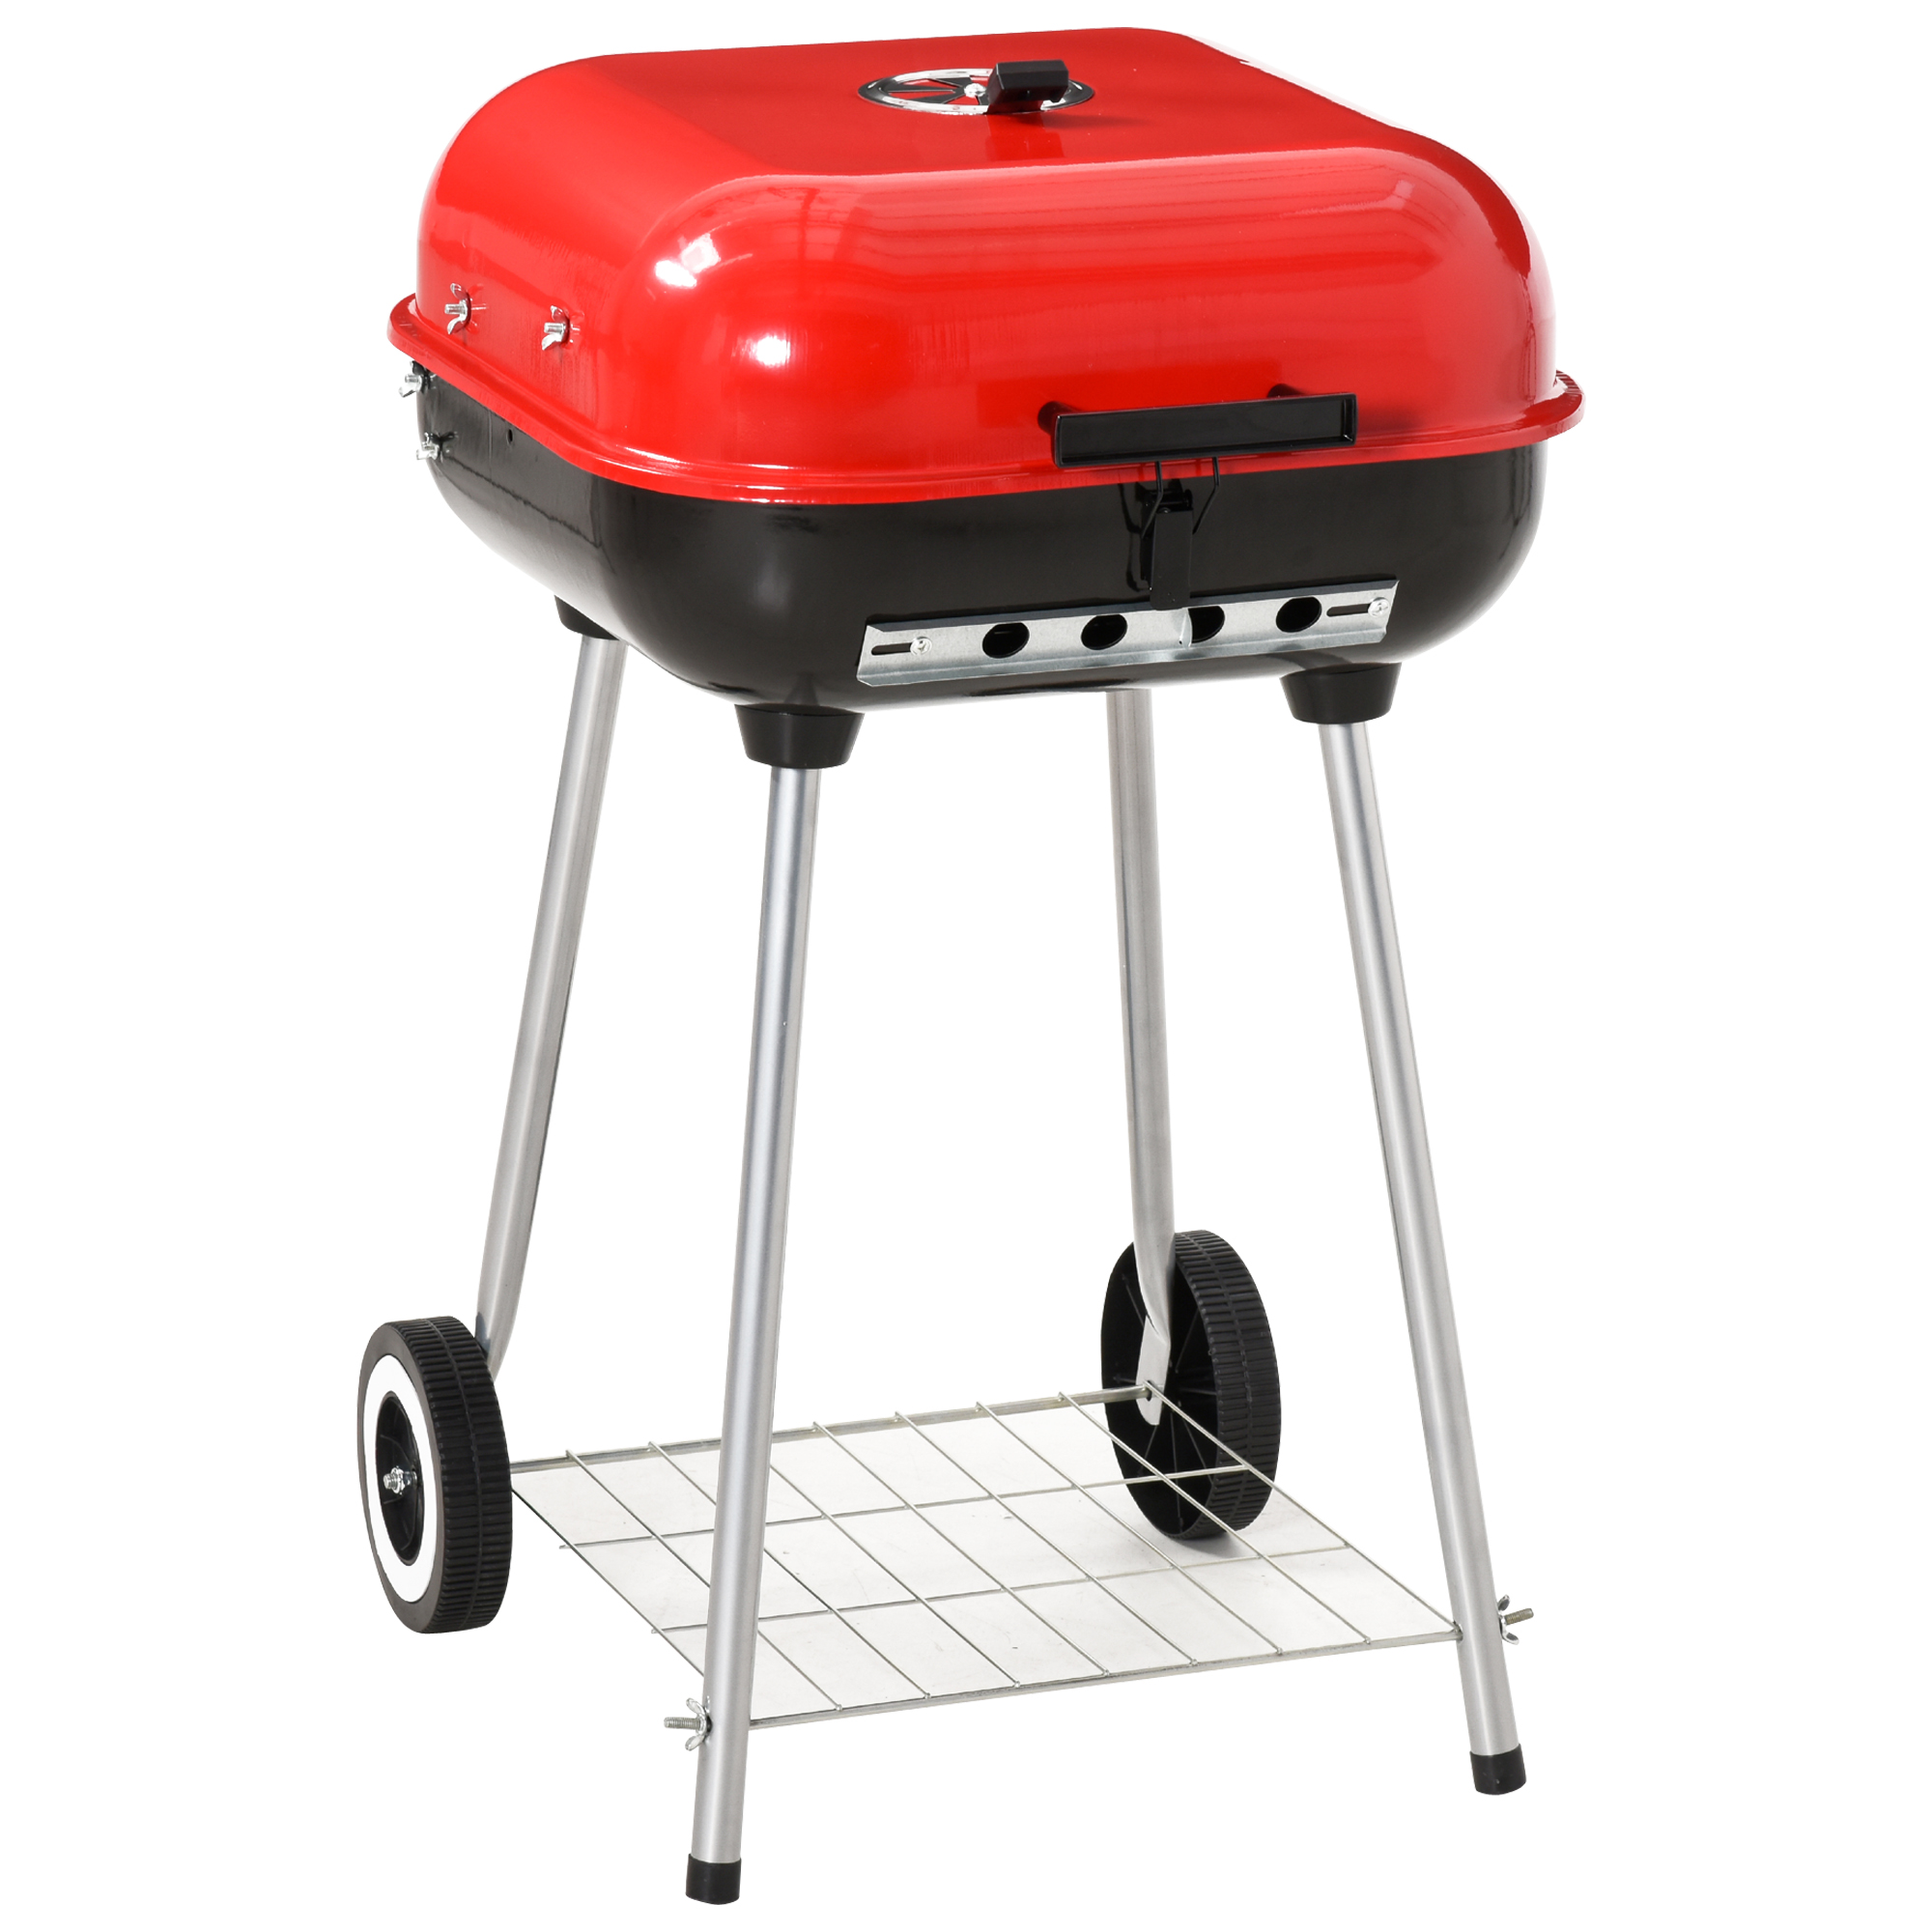 Outsunny Charcoal Trolley Bbq Garden Outdoor Barbecue Cooking Grill High Temperature Powder Wheel 46x52.5x76cm New